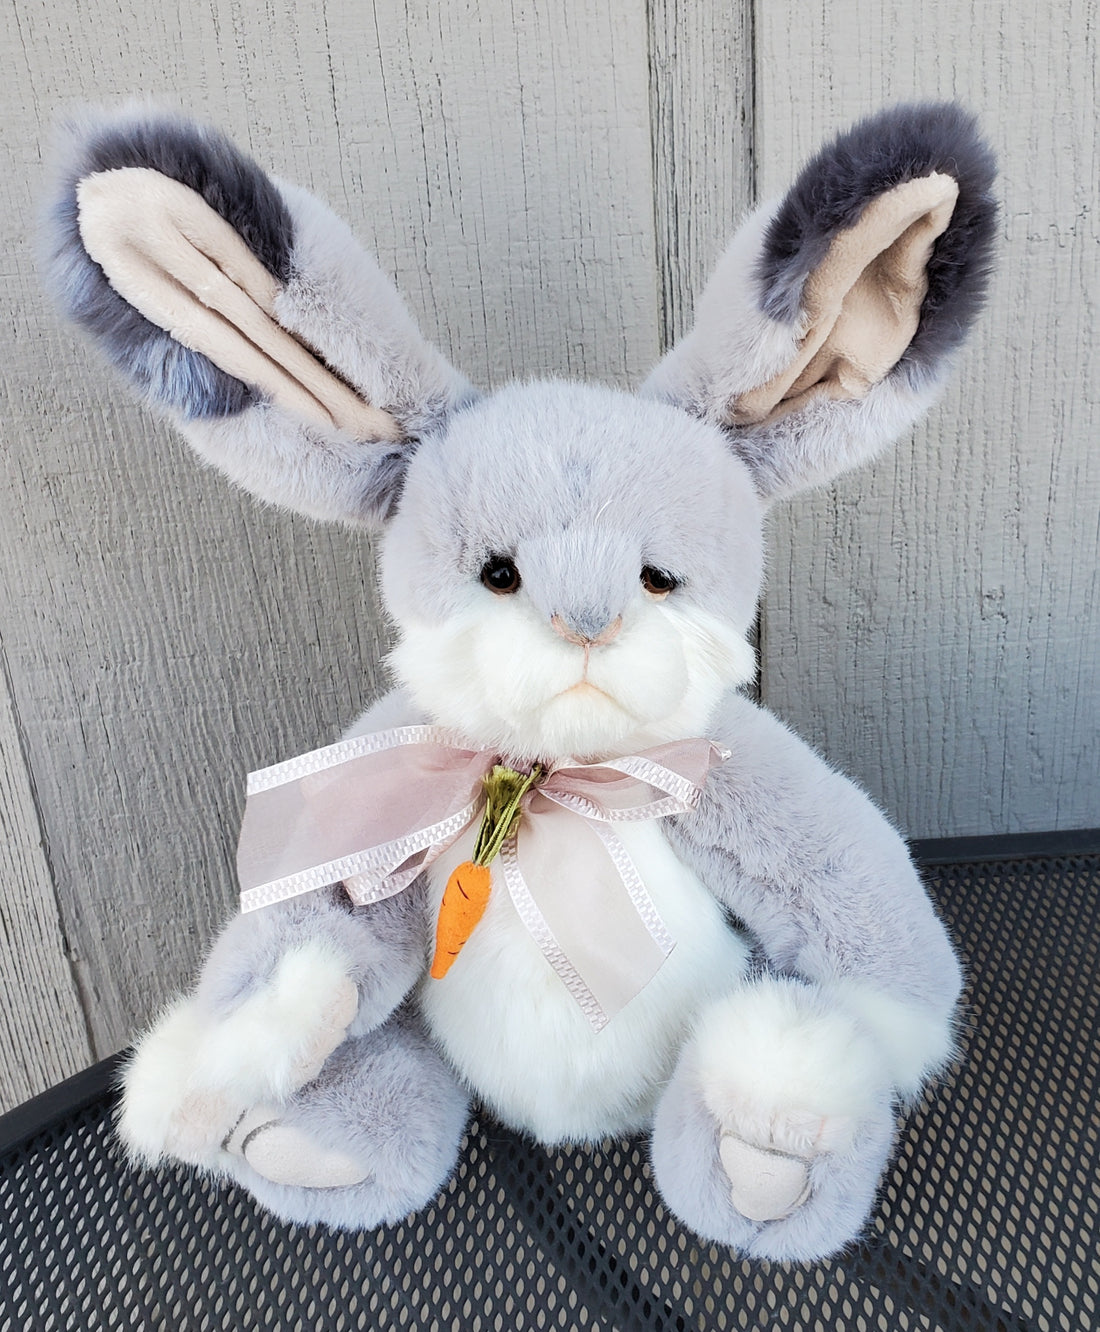 Cabbage Rose - 14" Ultra Soft Bunny by Charlie Bears